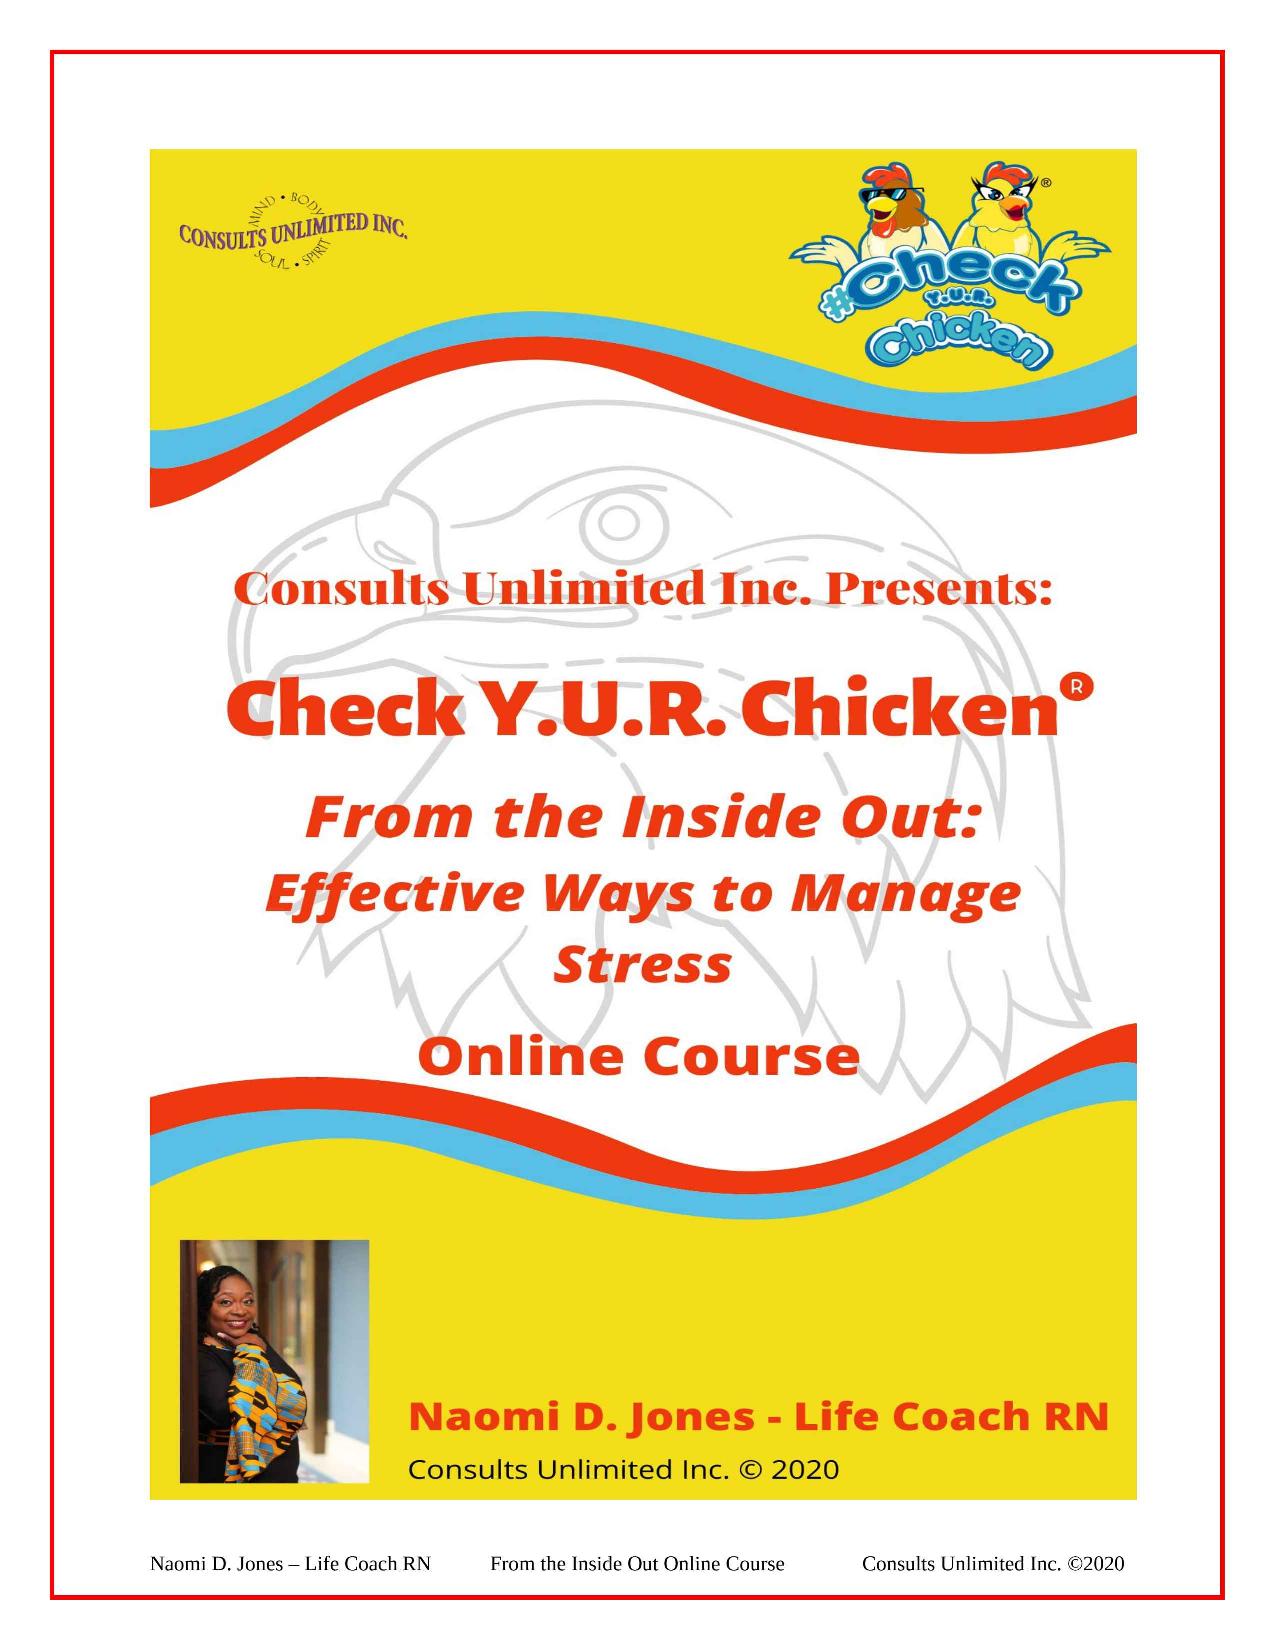 From The Inside Out: Effective Ways to Manage Stress (Online Course)